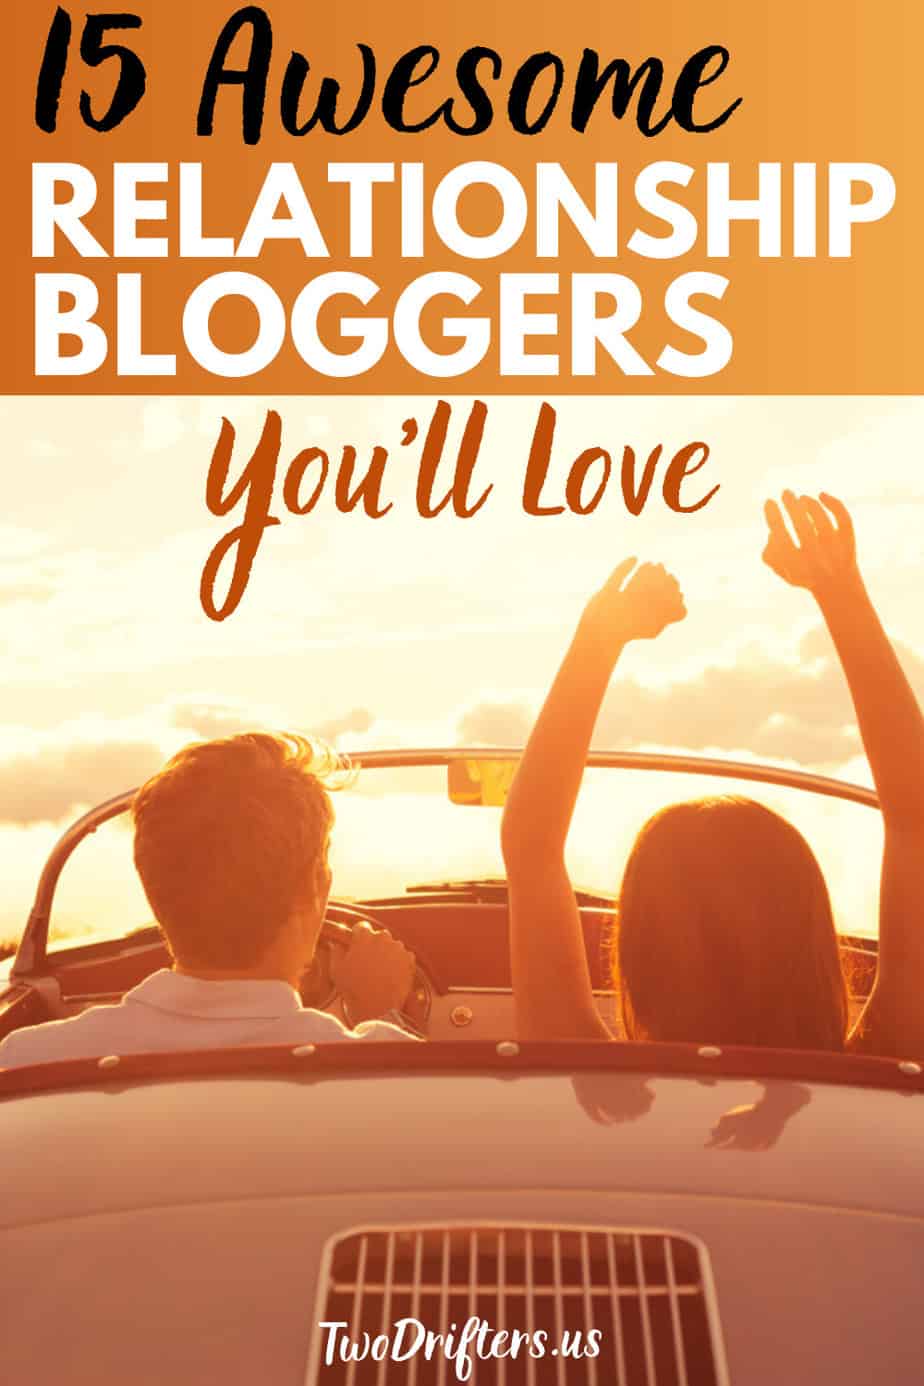 Pinterest social share image that says "15 Awesome Relationship Bloggers You'll Love."